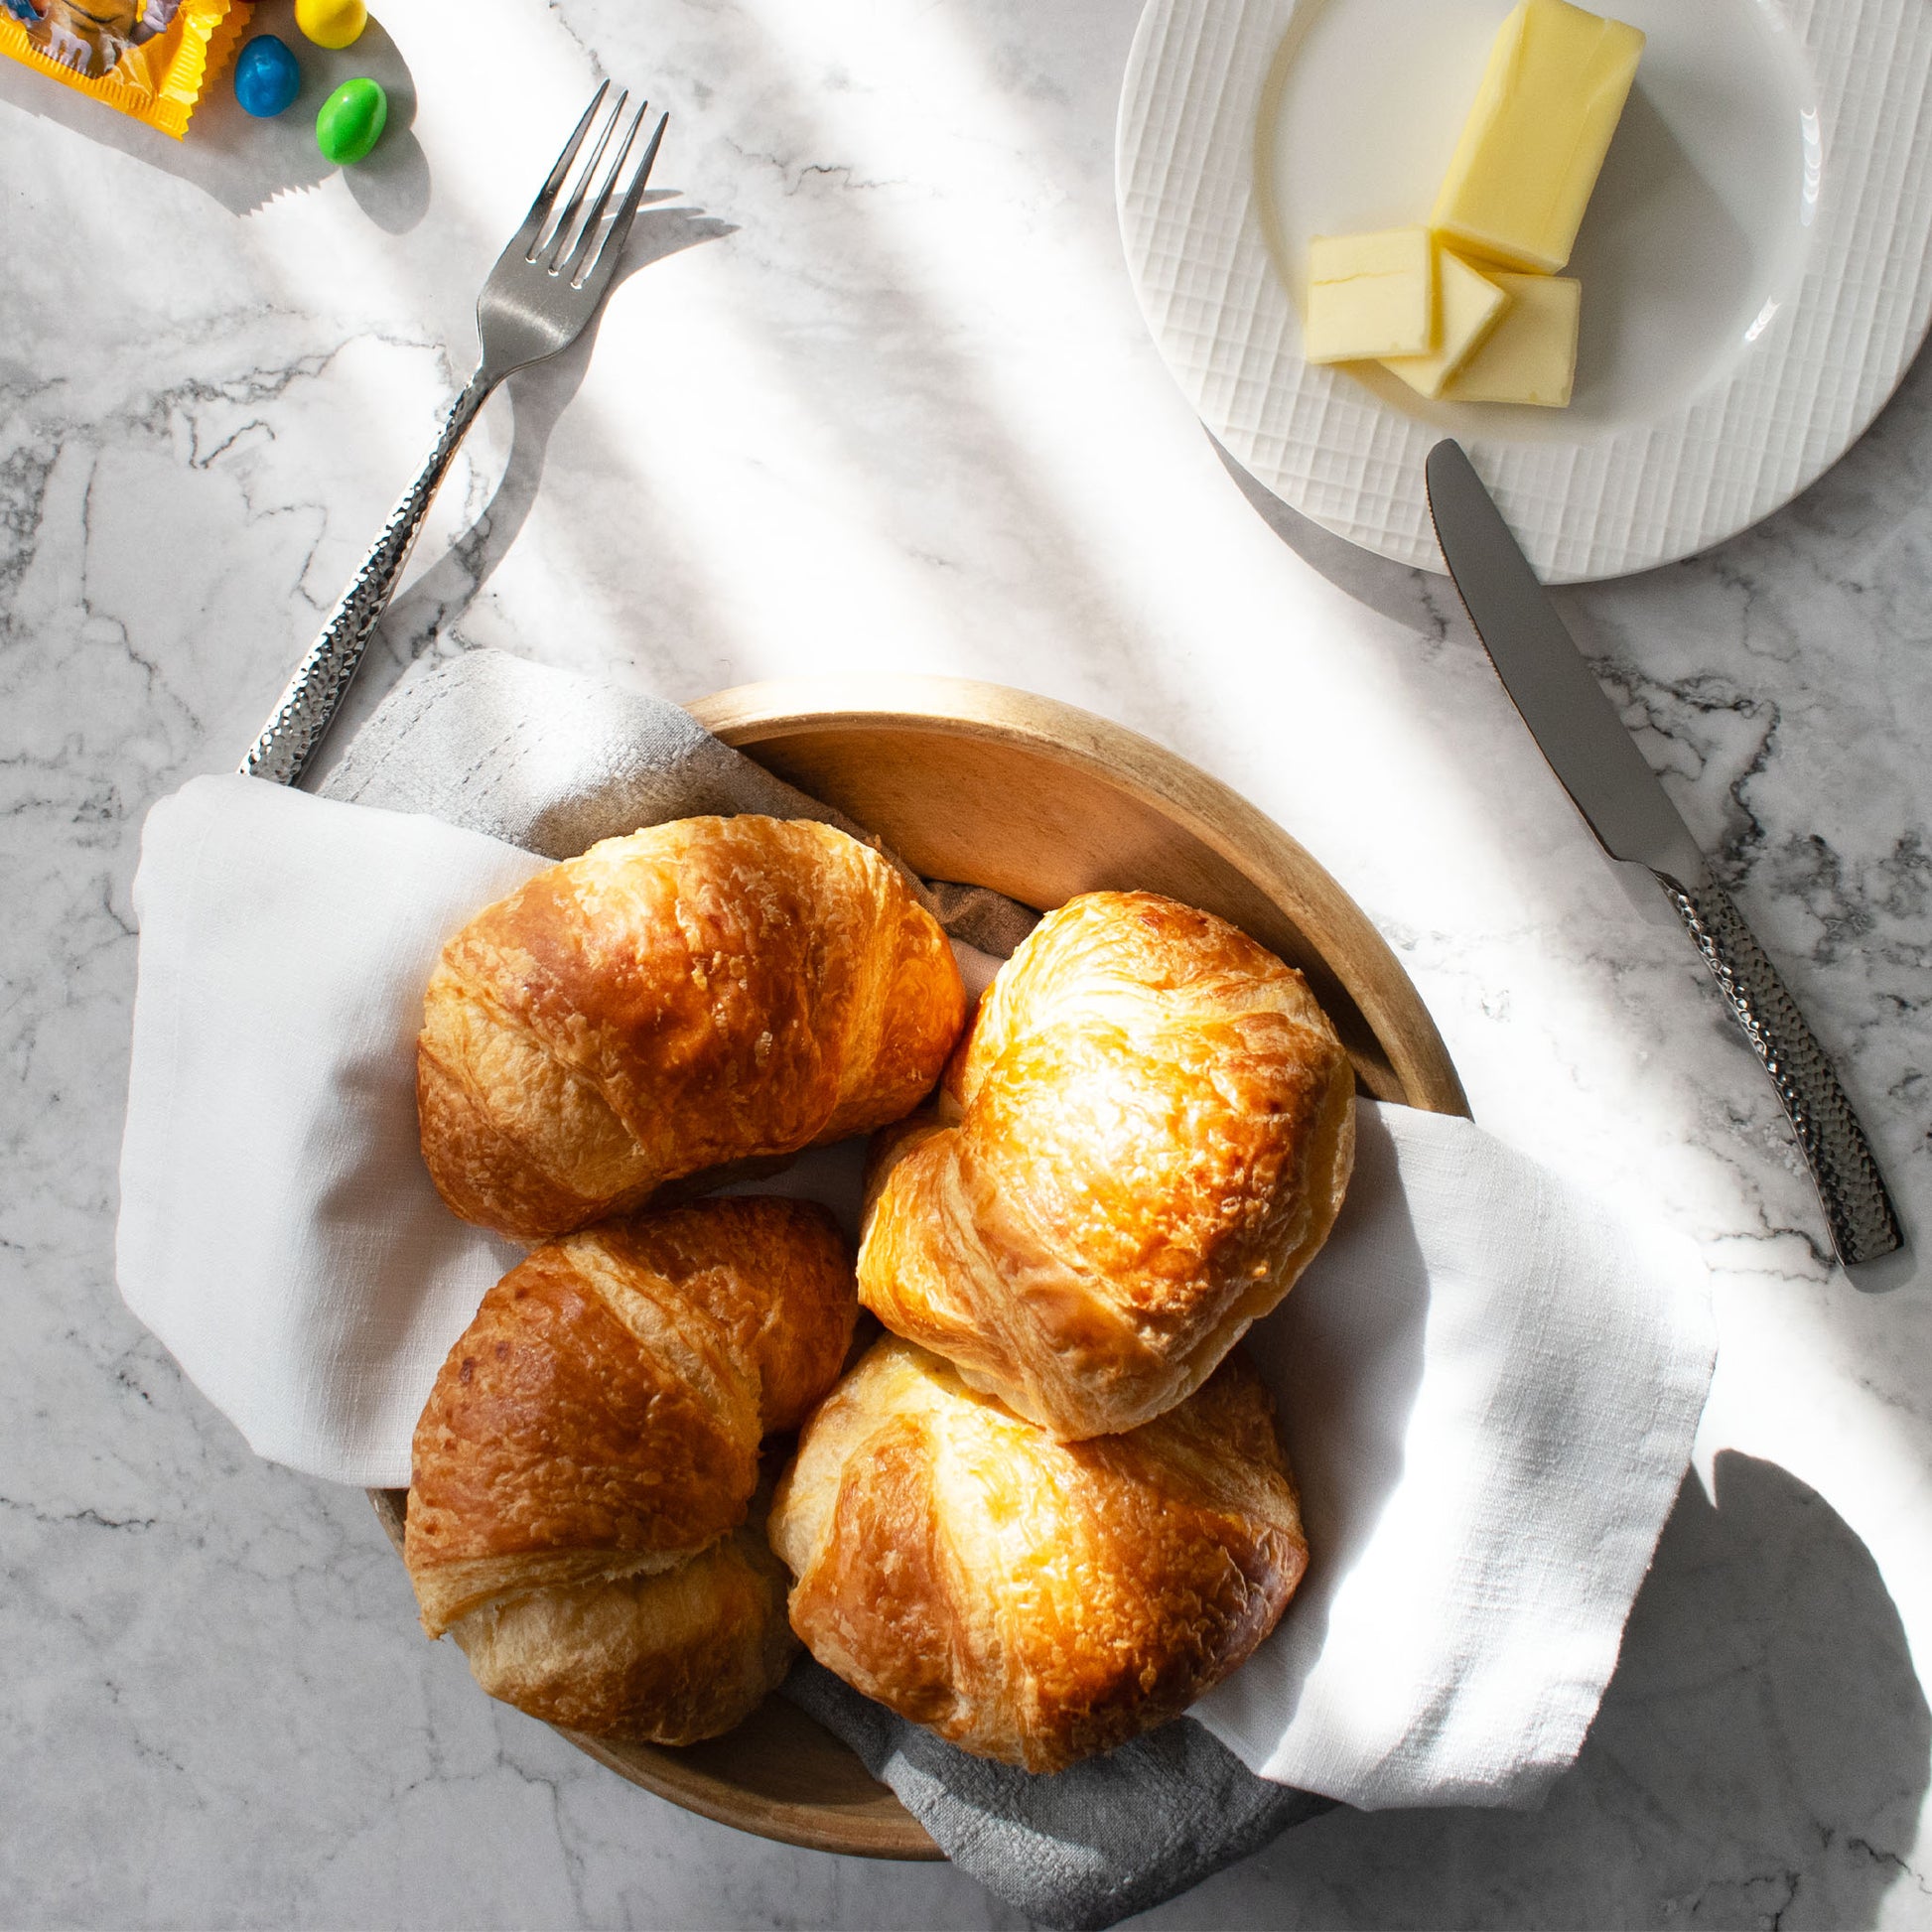 Polished silver hammered flatware on marble table with croissants and butter.